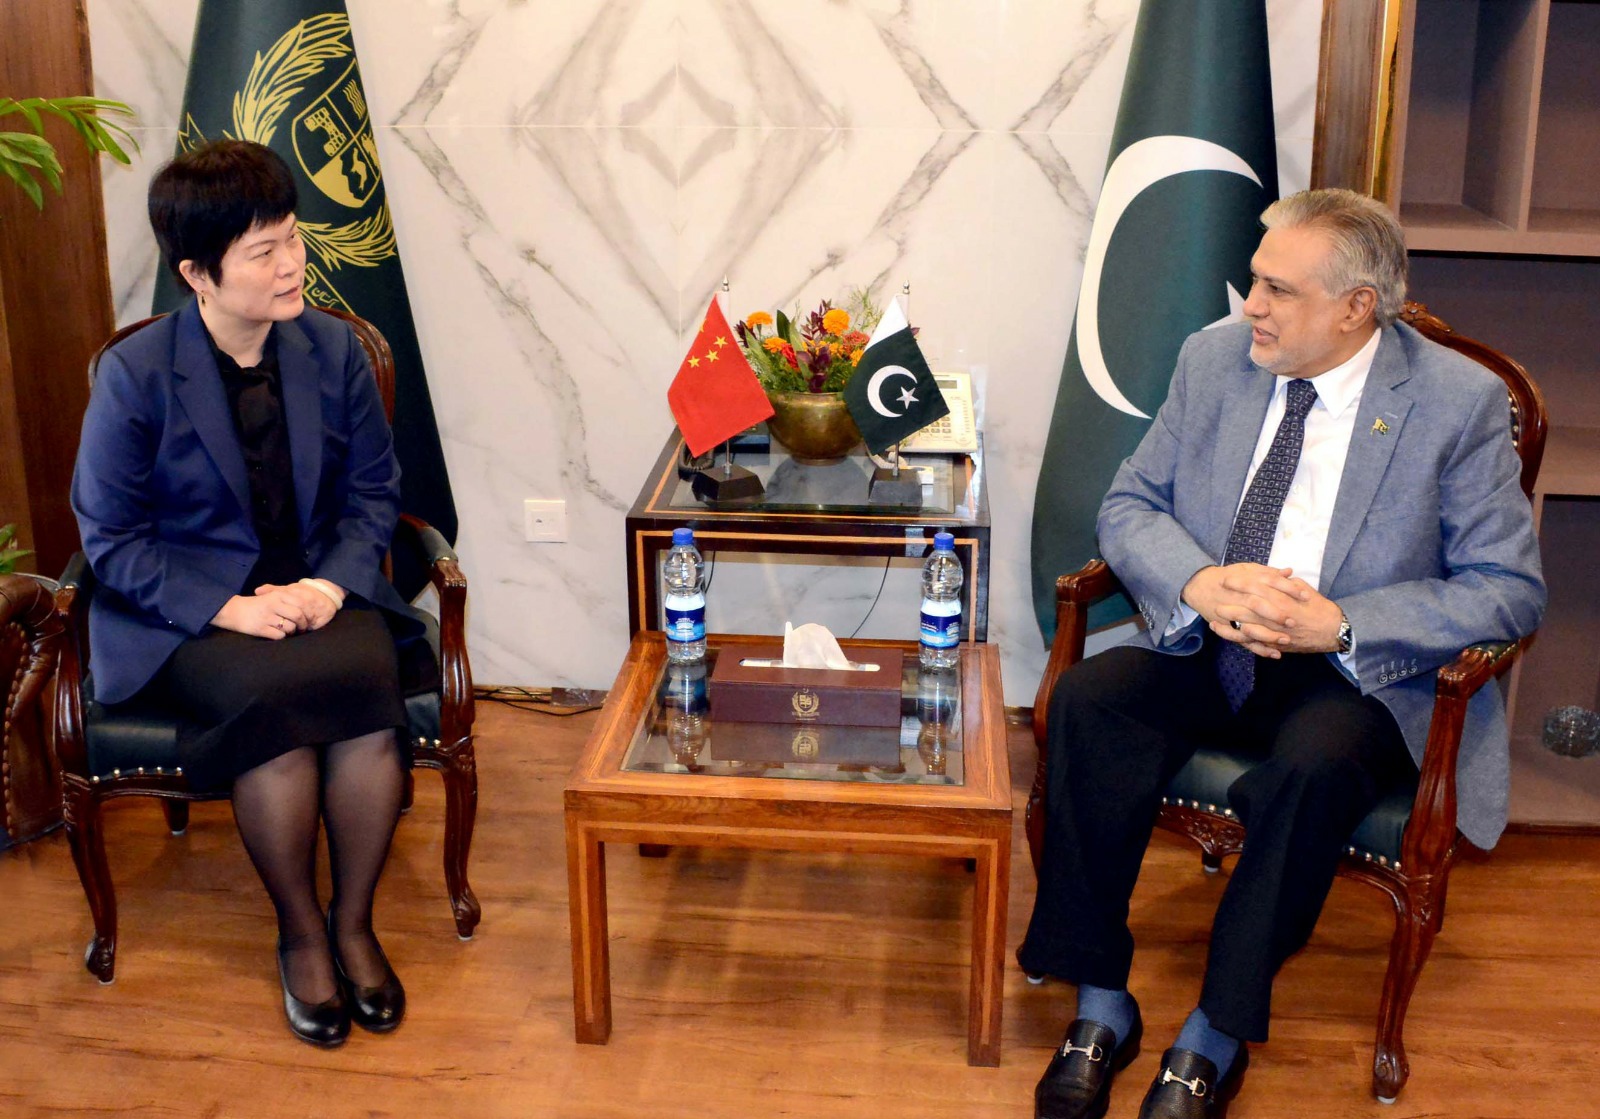 CHARGE D’AFFAIRES, EMBASSY OF THE PEOPLE’S REPUBLIC OF CHINA, H.E. PANG CHUNXUE CALLED ON THE LEADER OF THE HOUSE, SENATOR MOHAMMAD ISHAQ DAR, AT PARLIAMENT HOUSE.